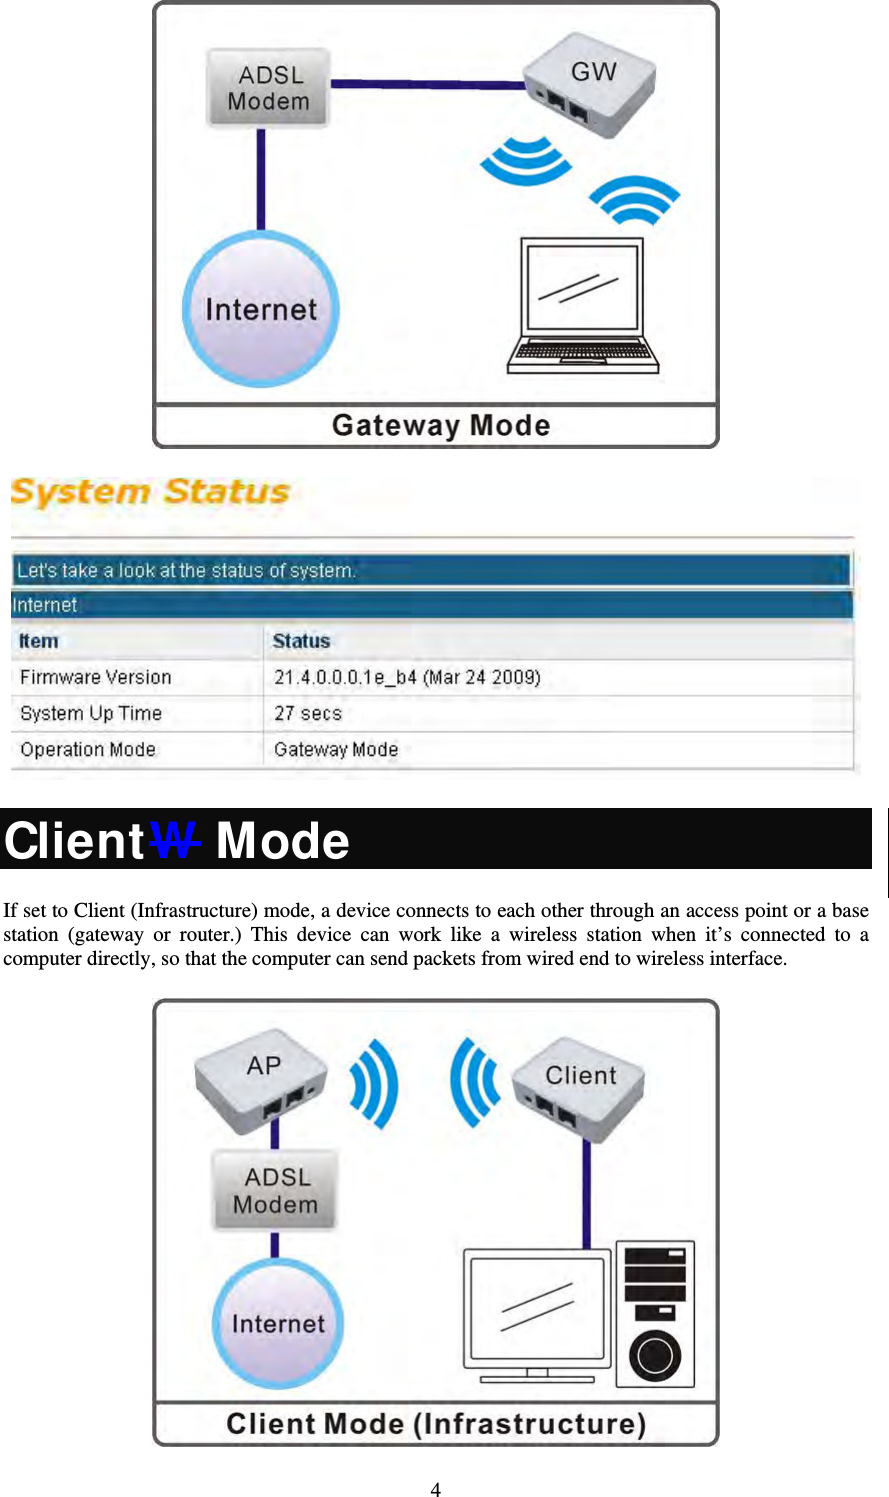   4  ClientW Mode If set to Client (Infrastructure) mode, a device connects to each other through an access point or a base station (gateway or router.) This device can work like a wireless station when it’s connected to a computer directly, so that the computer can send packets from wired end to wireless interface.   